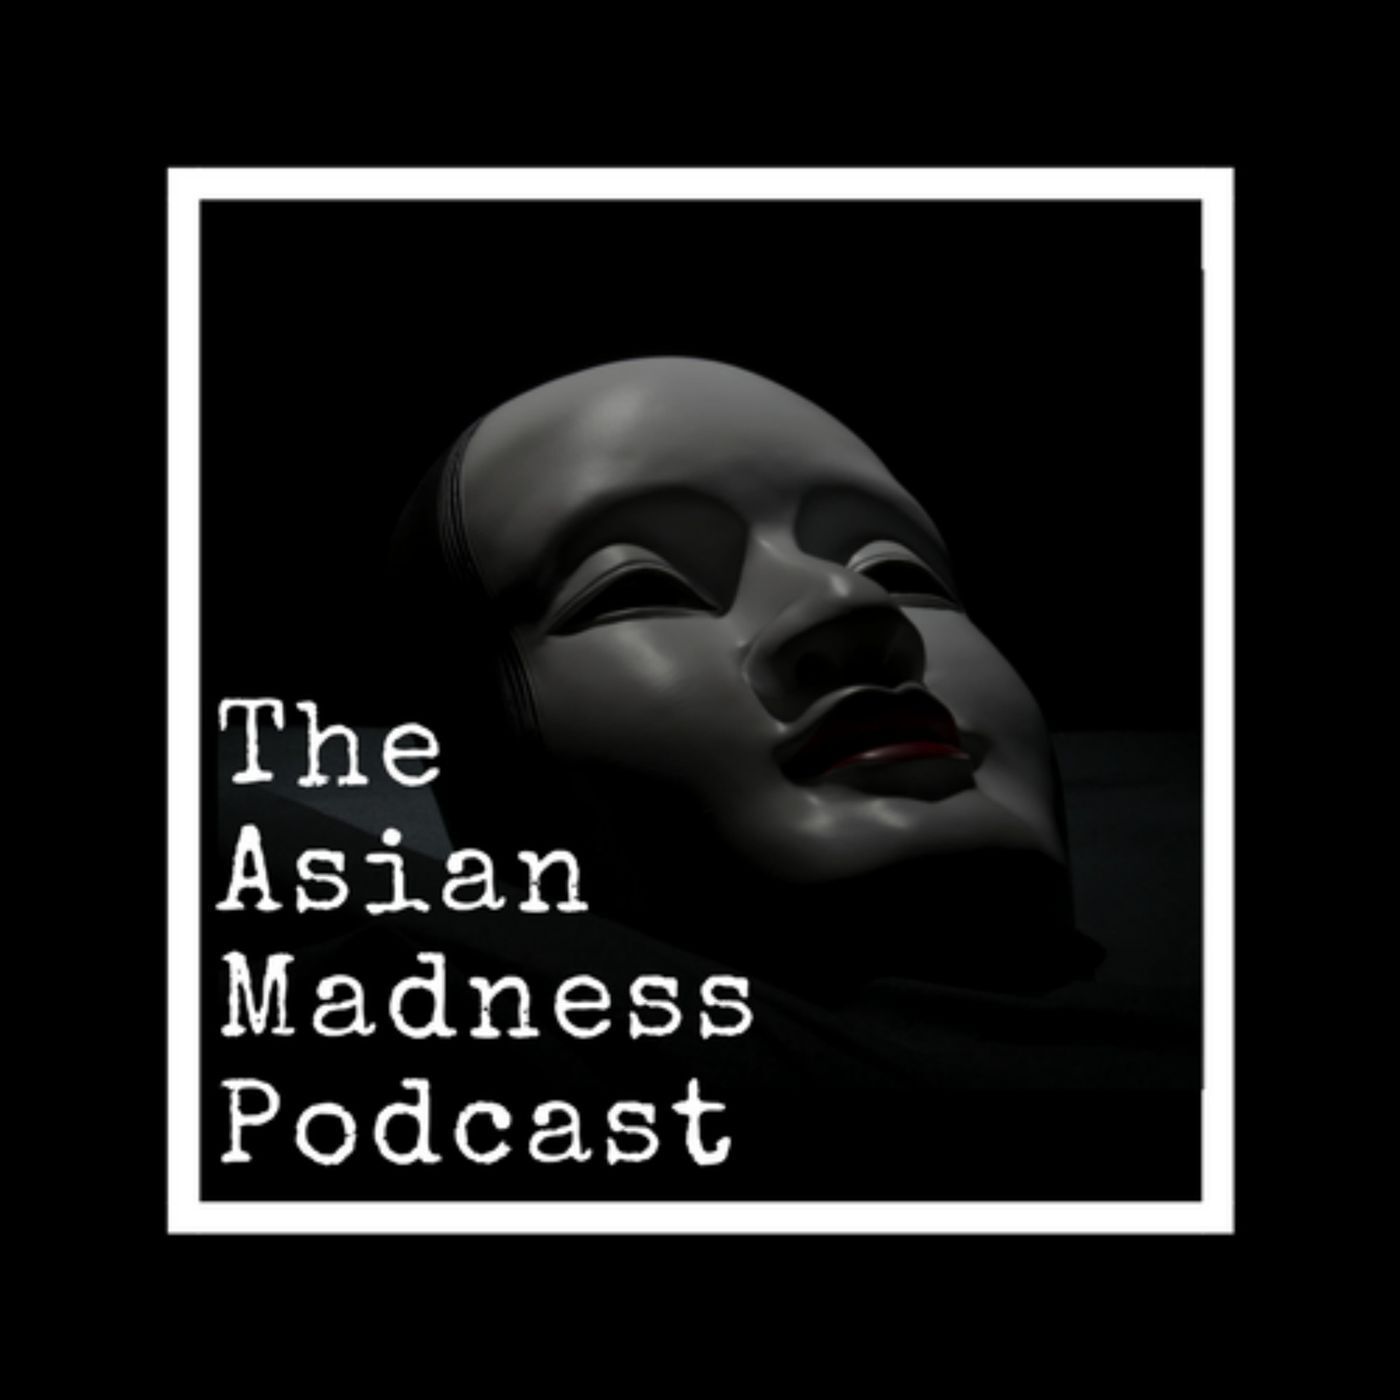 Welcome to The Asian Madness Podcast